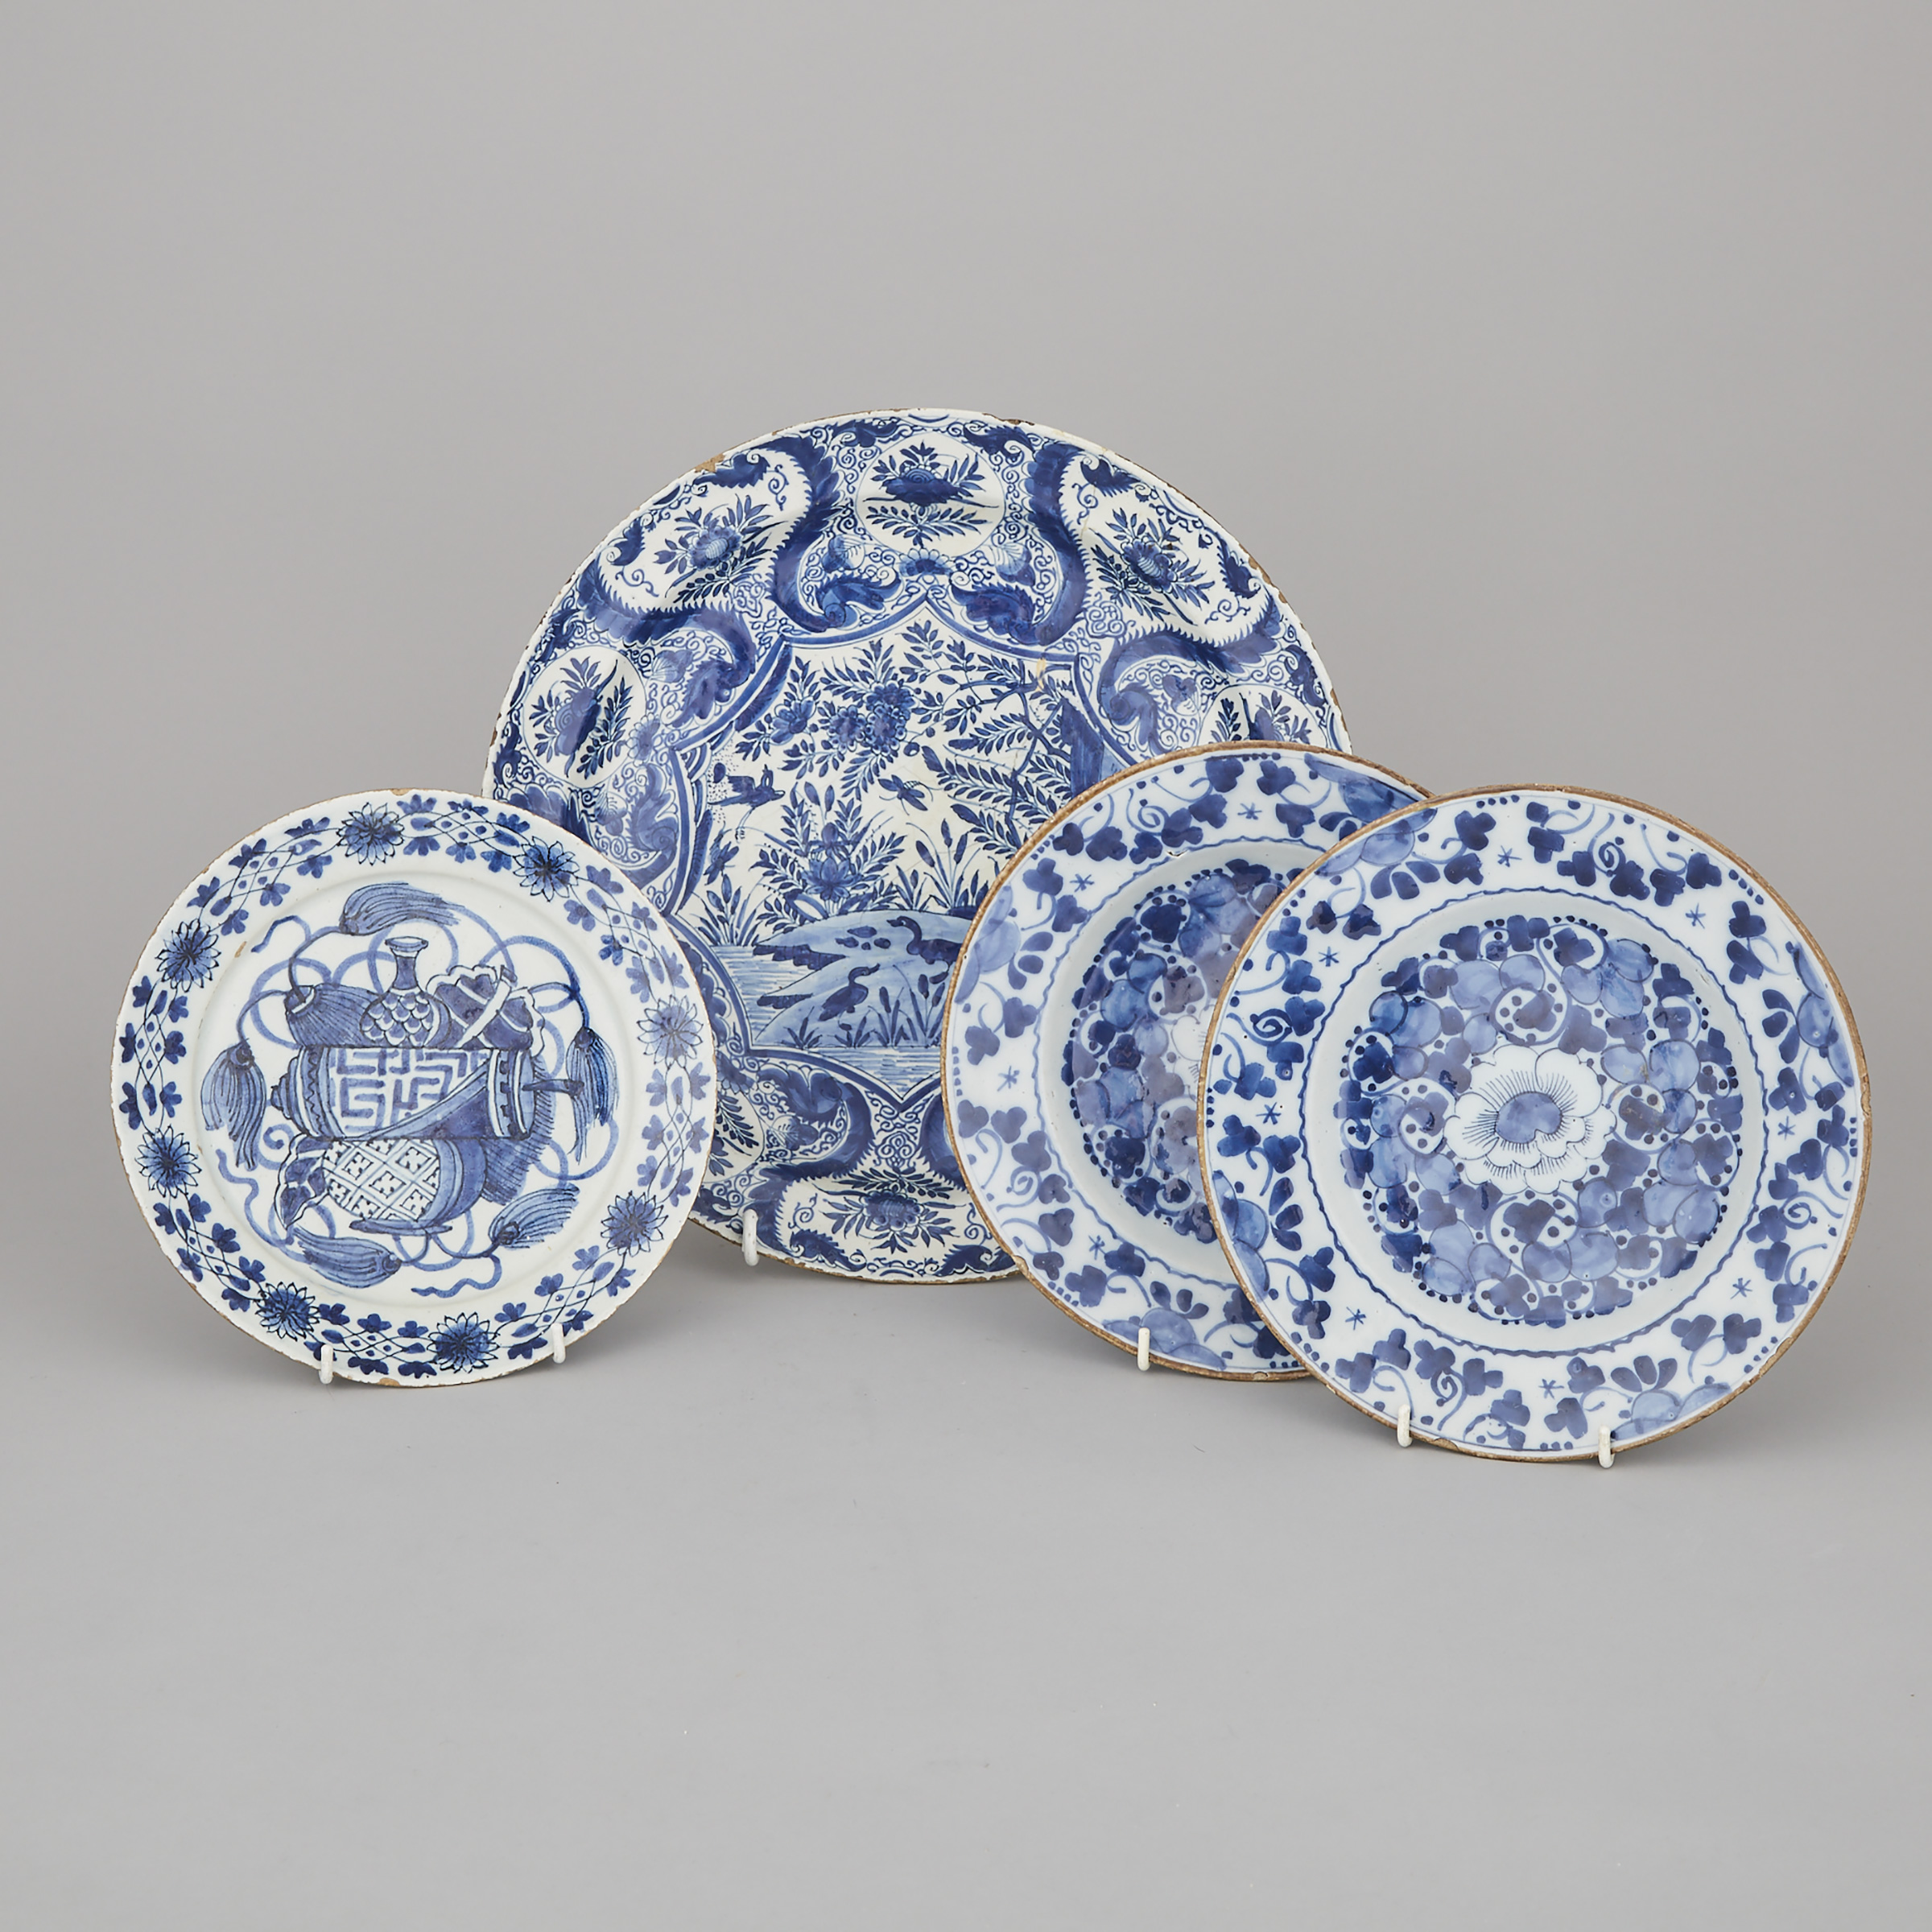 Dutch Delft Blue and White Charger, De Porceleyne Klaeuw, and Three Plates, second half of the 18th century